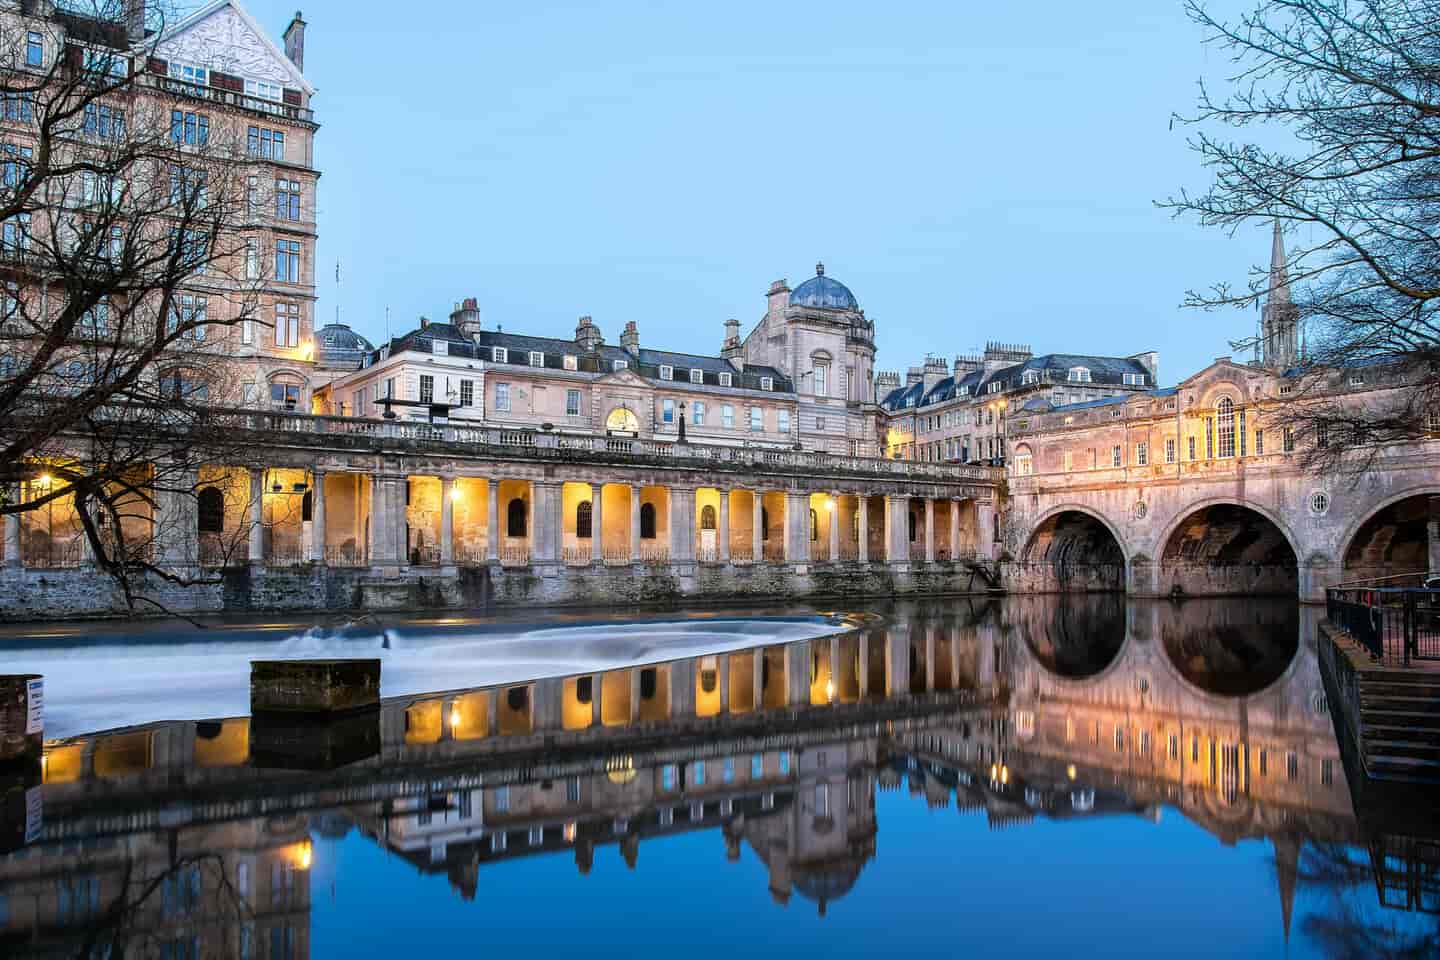 Student Accommodation in Bath - Pulteney Bridge in the evening